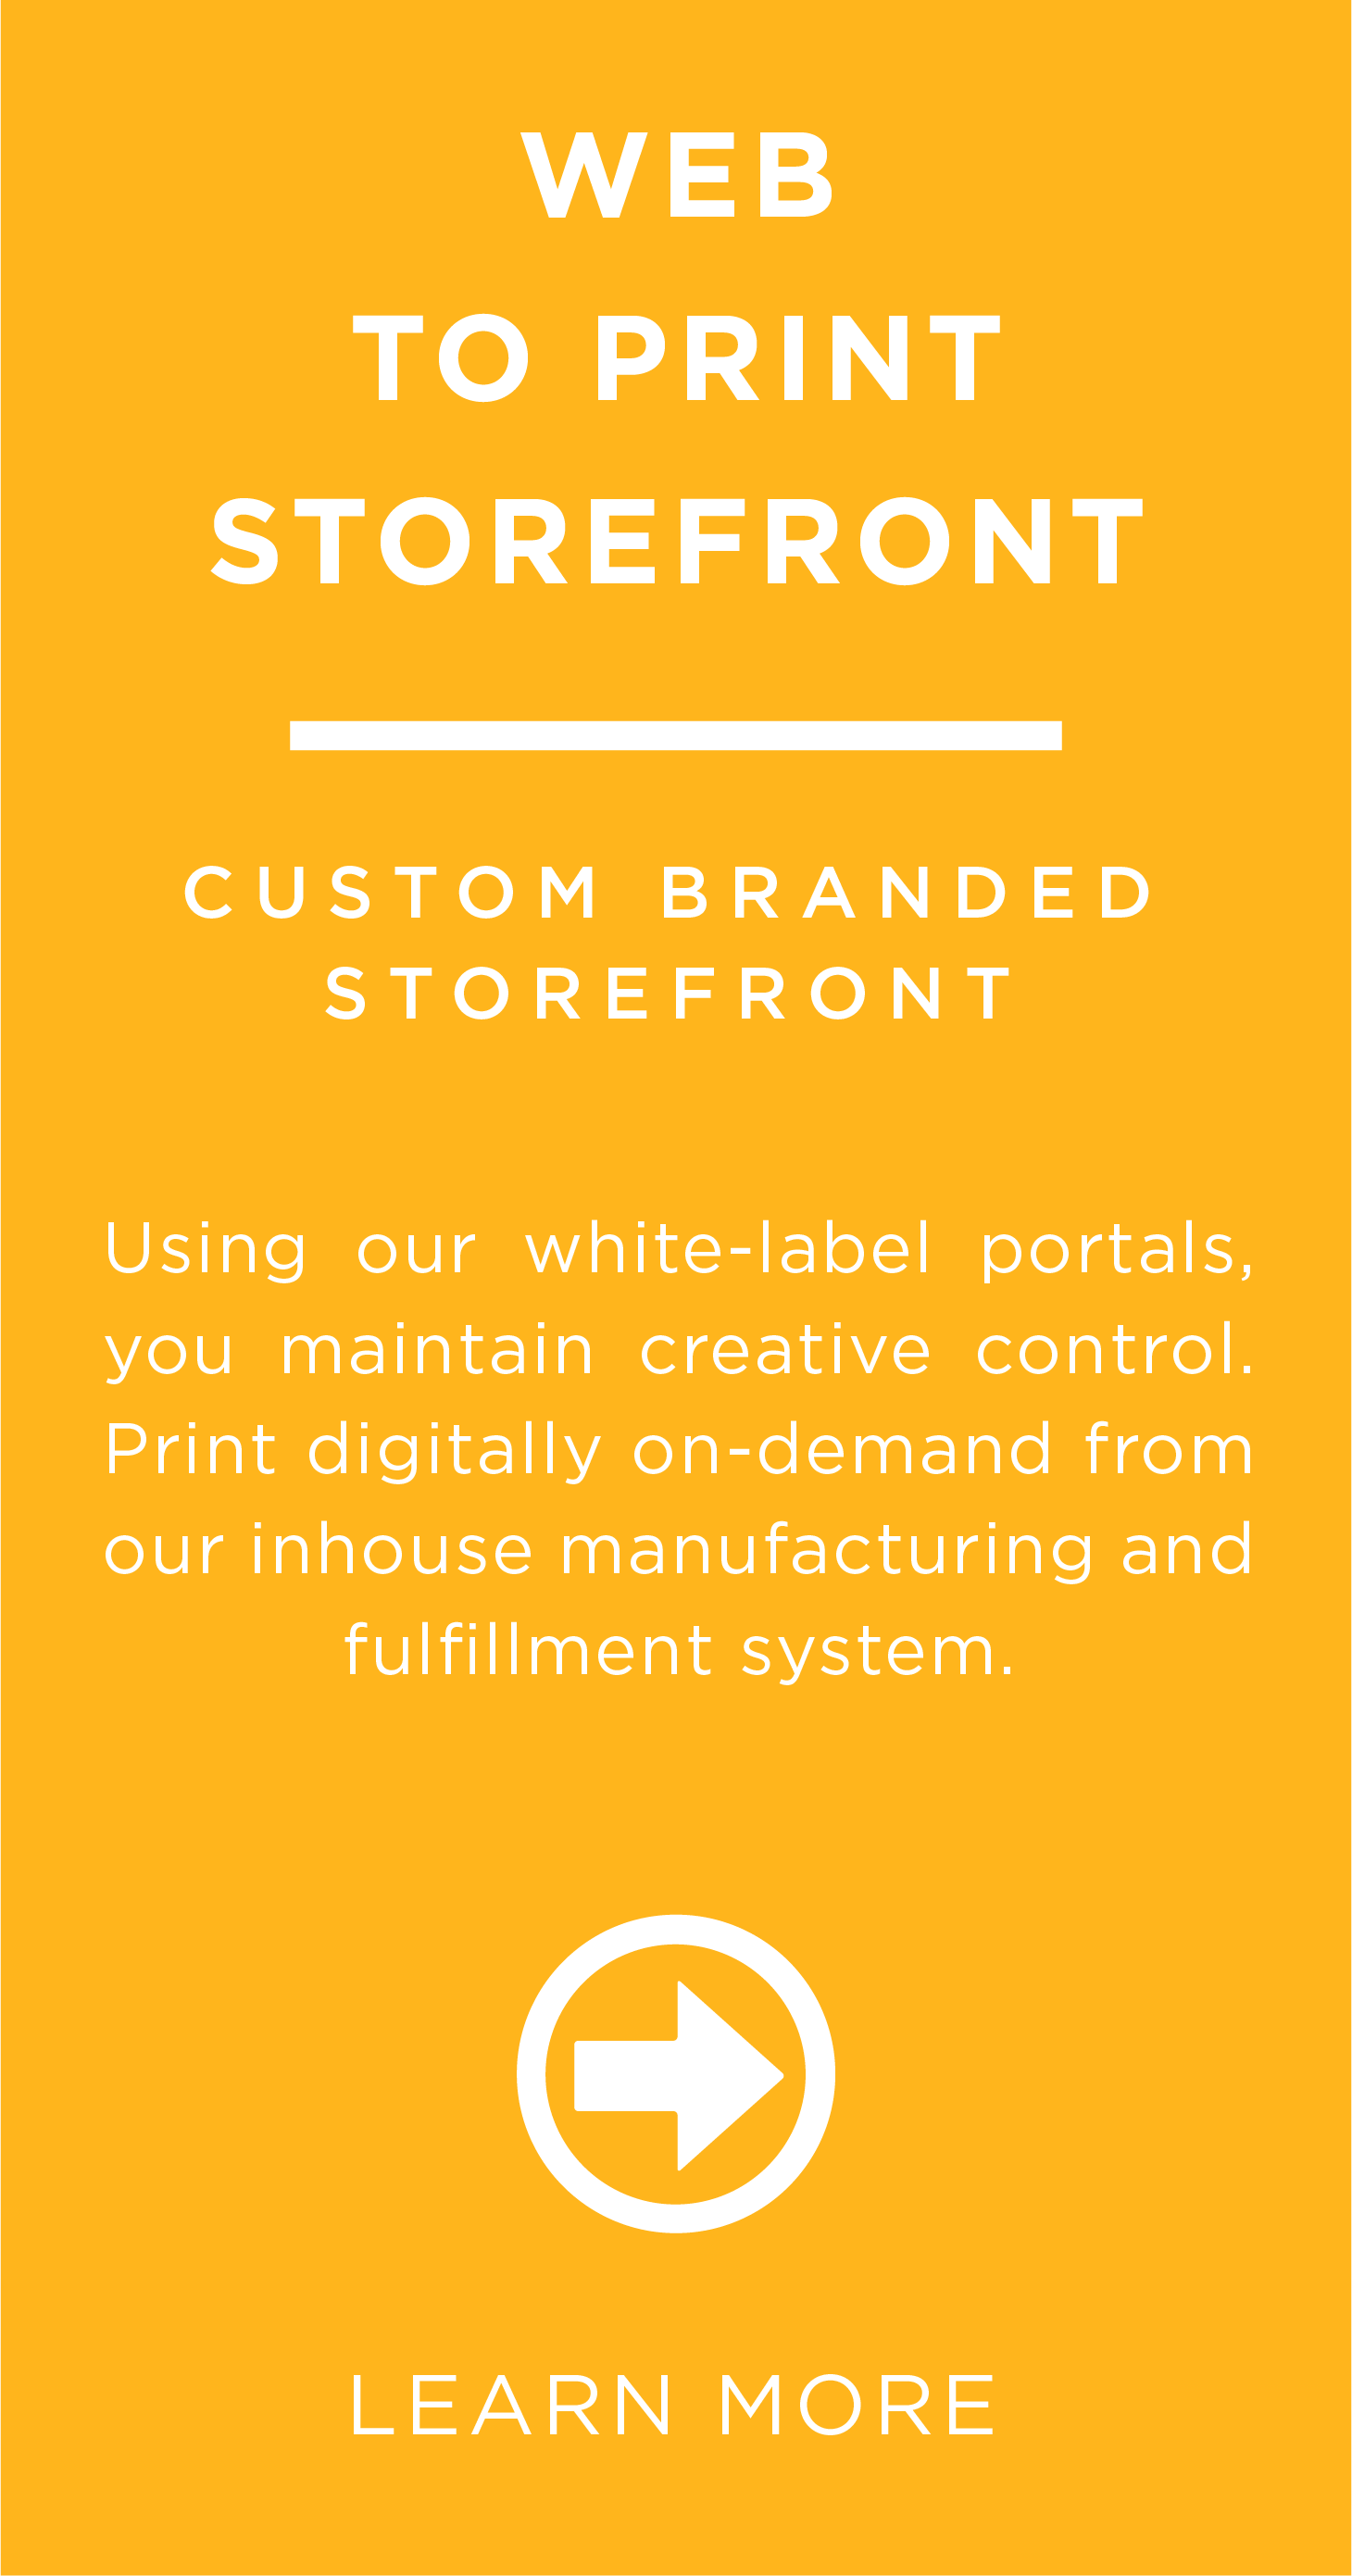 <h2>Custom Branded Storefront</h2> <p>Using our white label portals, you maintain creative control. Print digitally on demand from our in house manufacturing and fulfillment system</p>